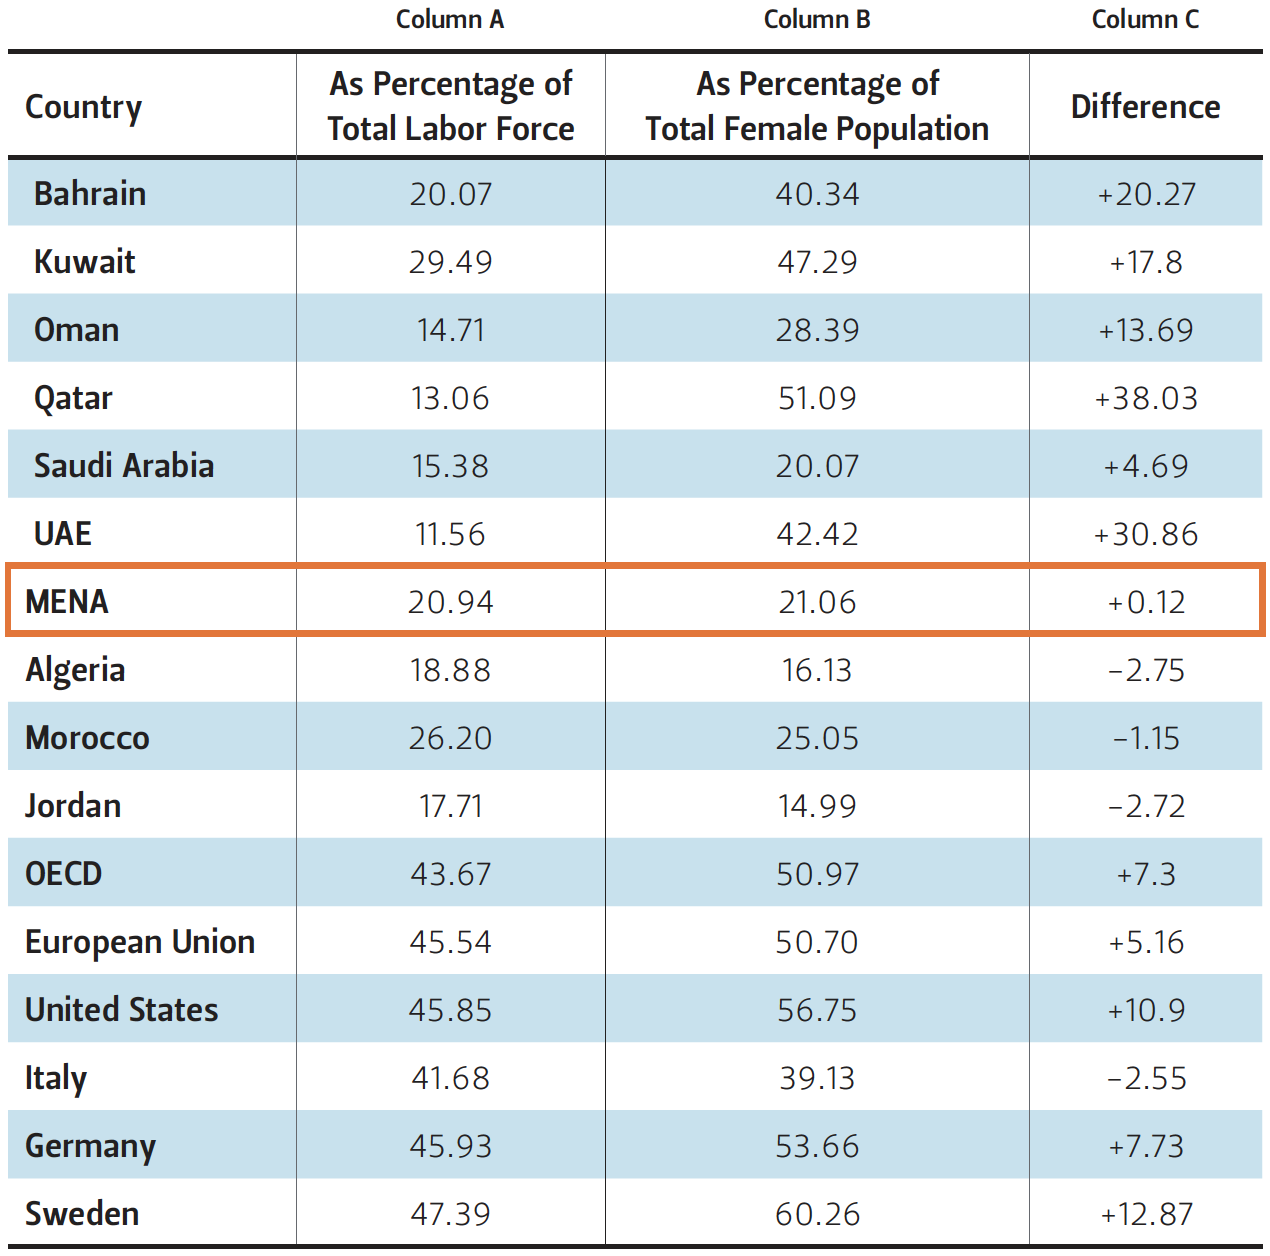 This table compares percentages about women in the workforce across countries.